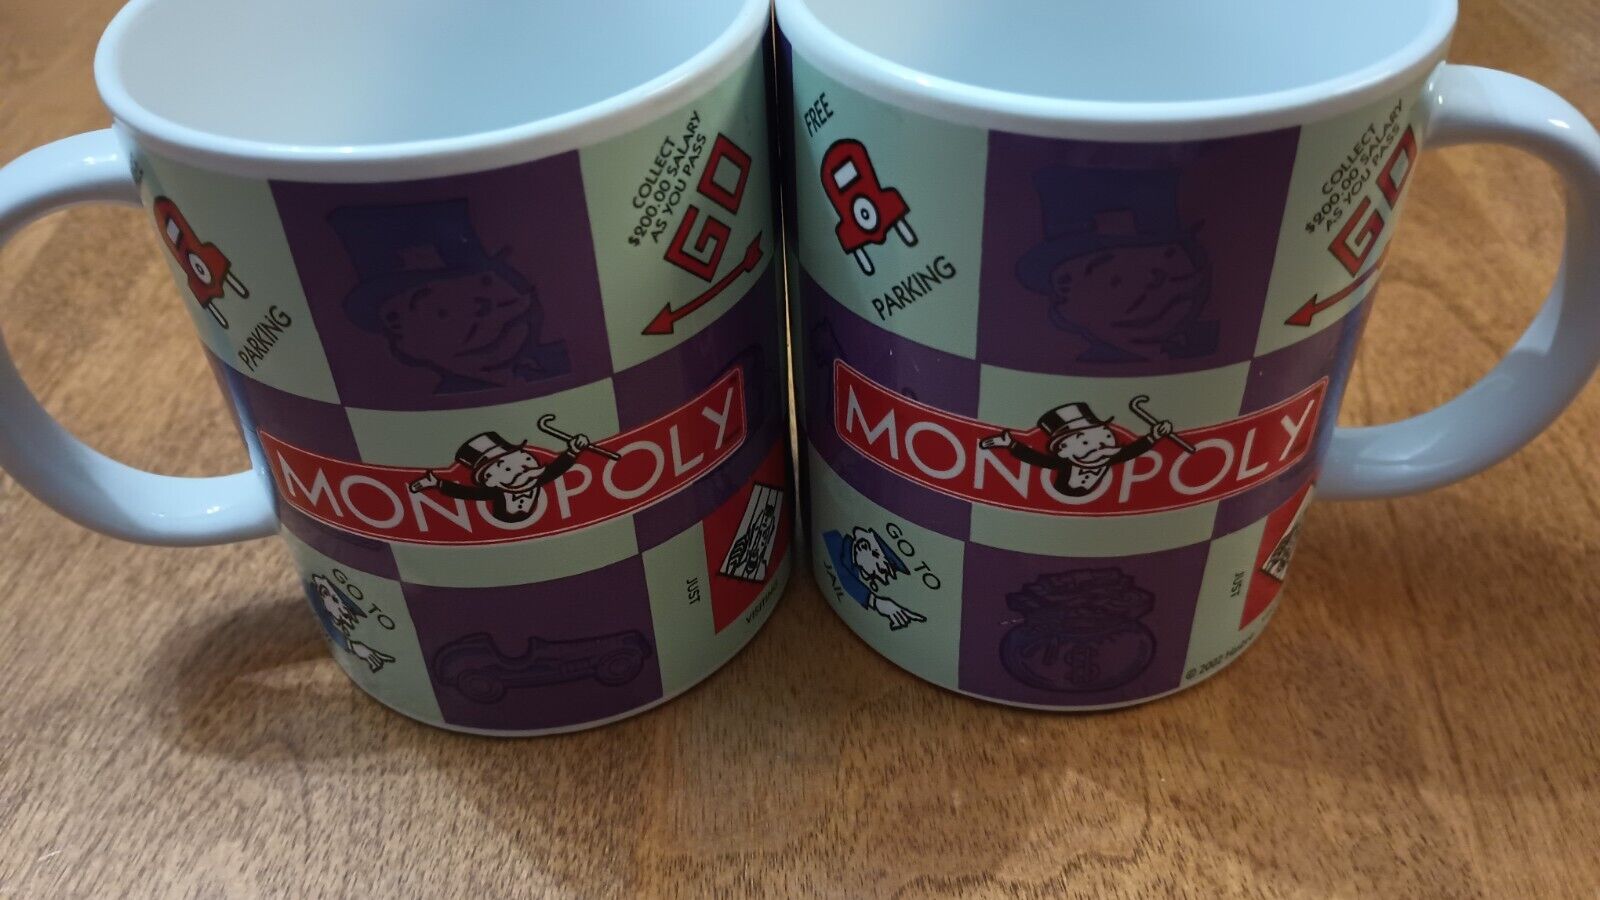 VTG, 2002 pair of Monopoly Coffee Mugs, Sherwood Brands of RI, INC. Excellent co